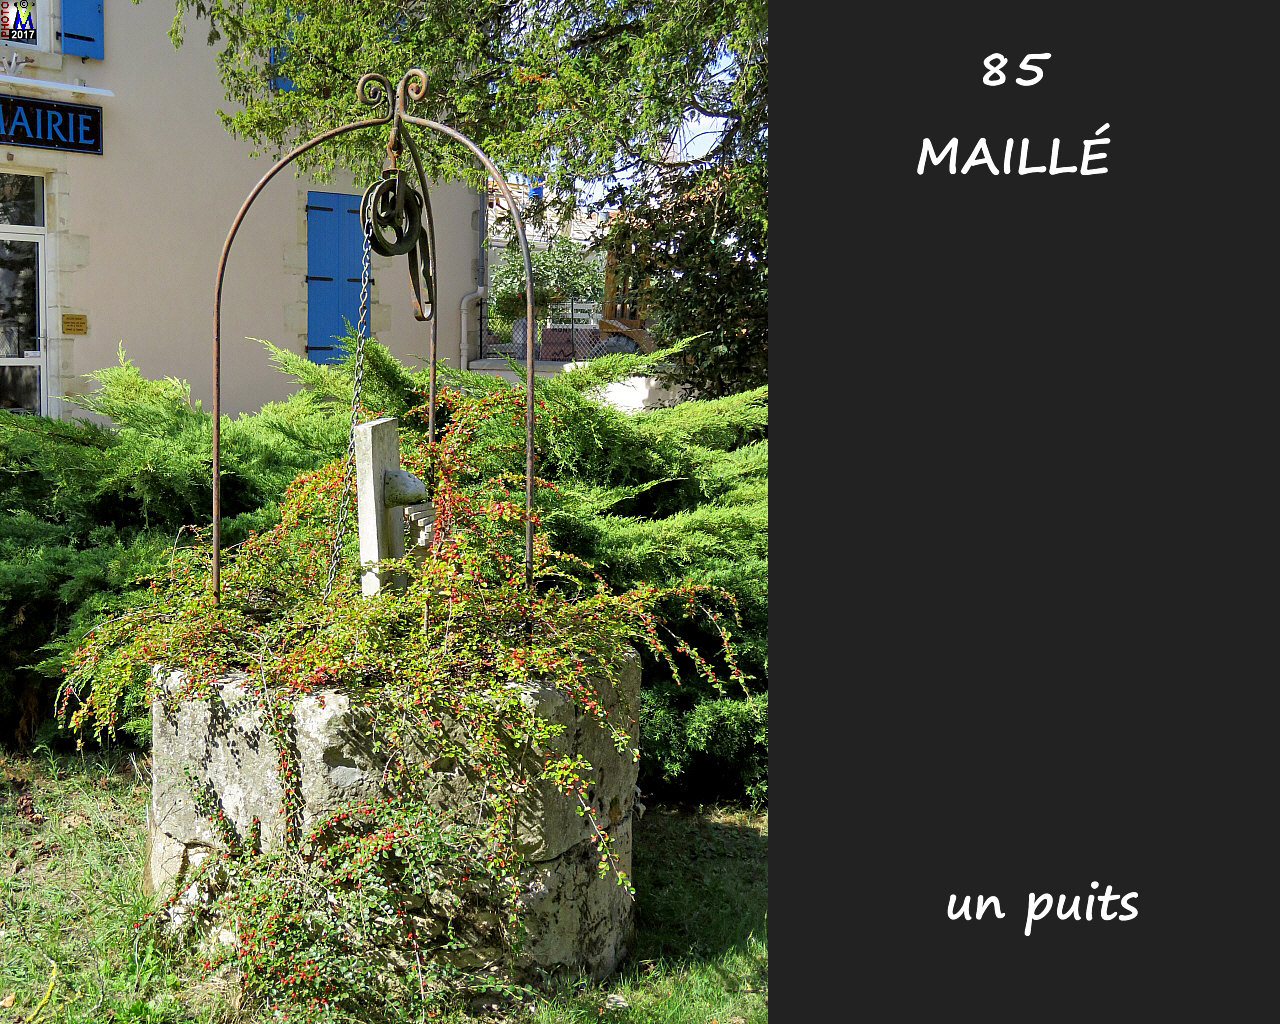 85MAILLE_puits_1020.jpg